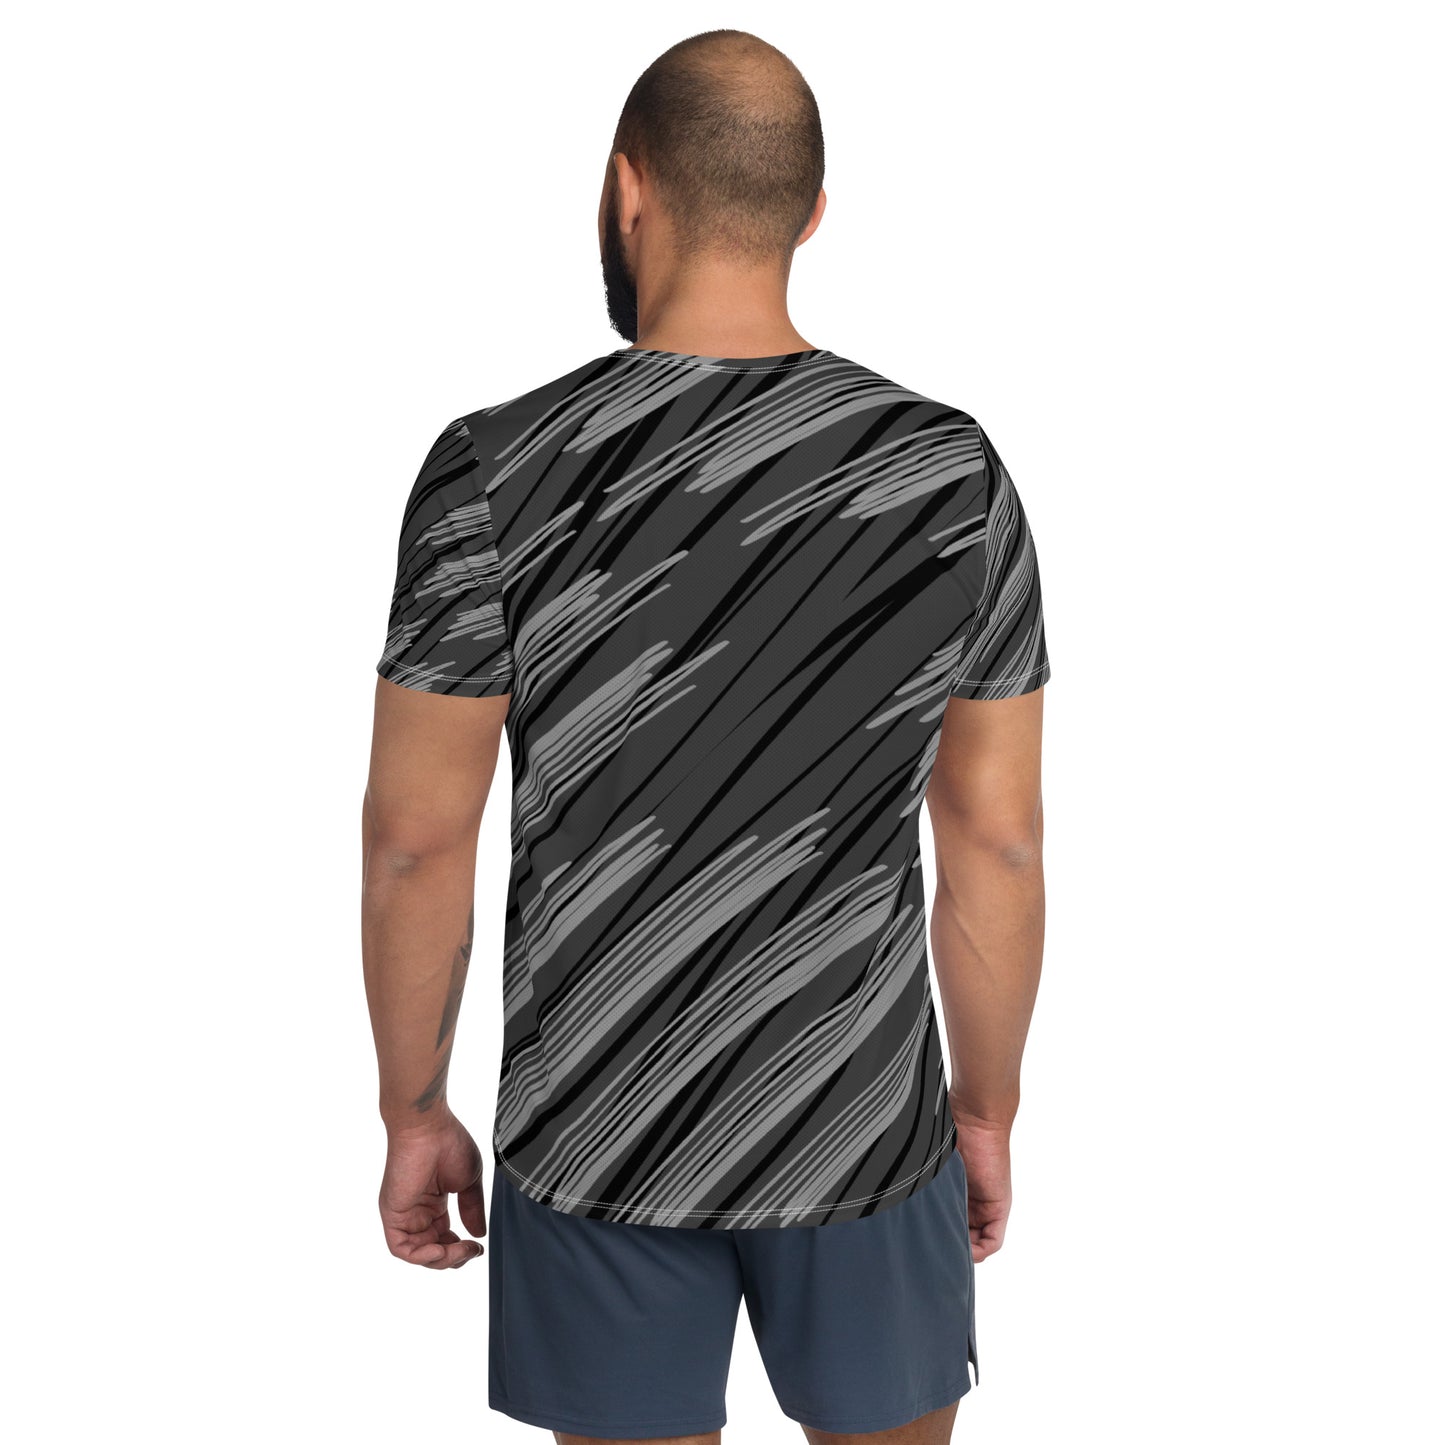 TIME OF VIBES - Men's Athletic T-shirt ABSTRACT - €45.00